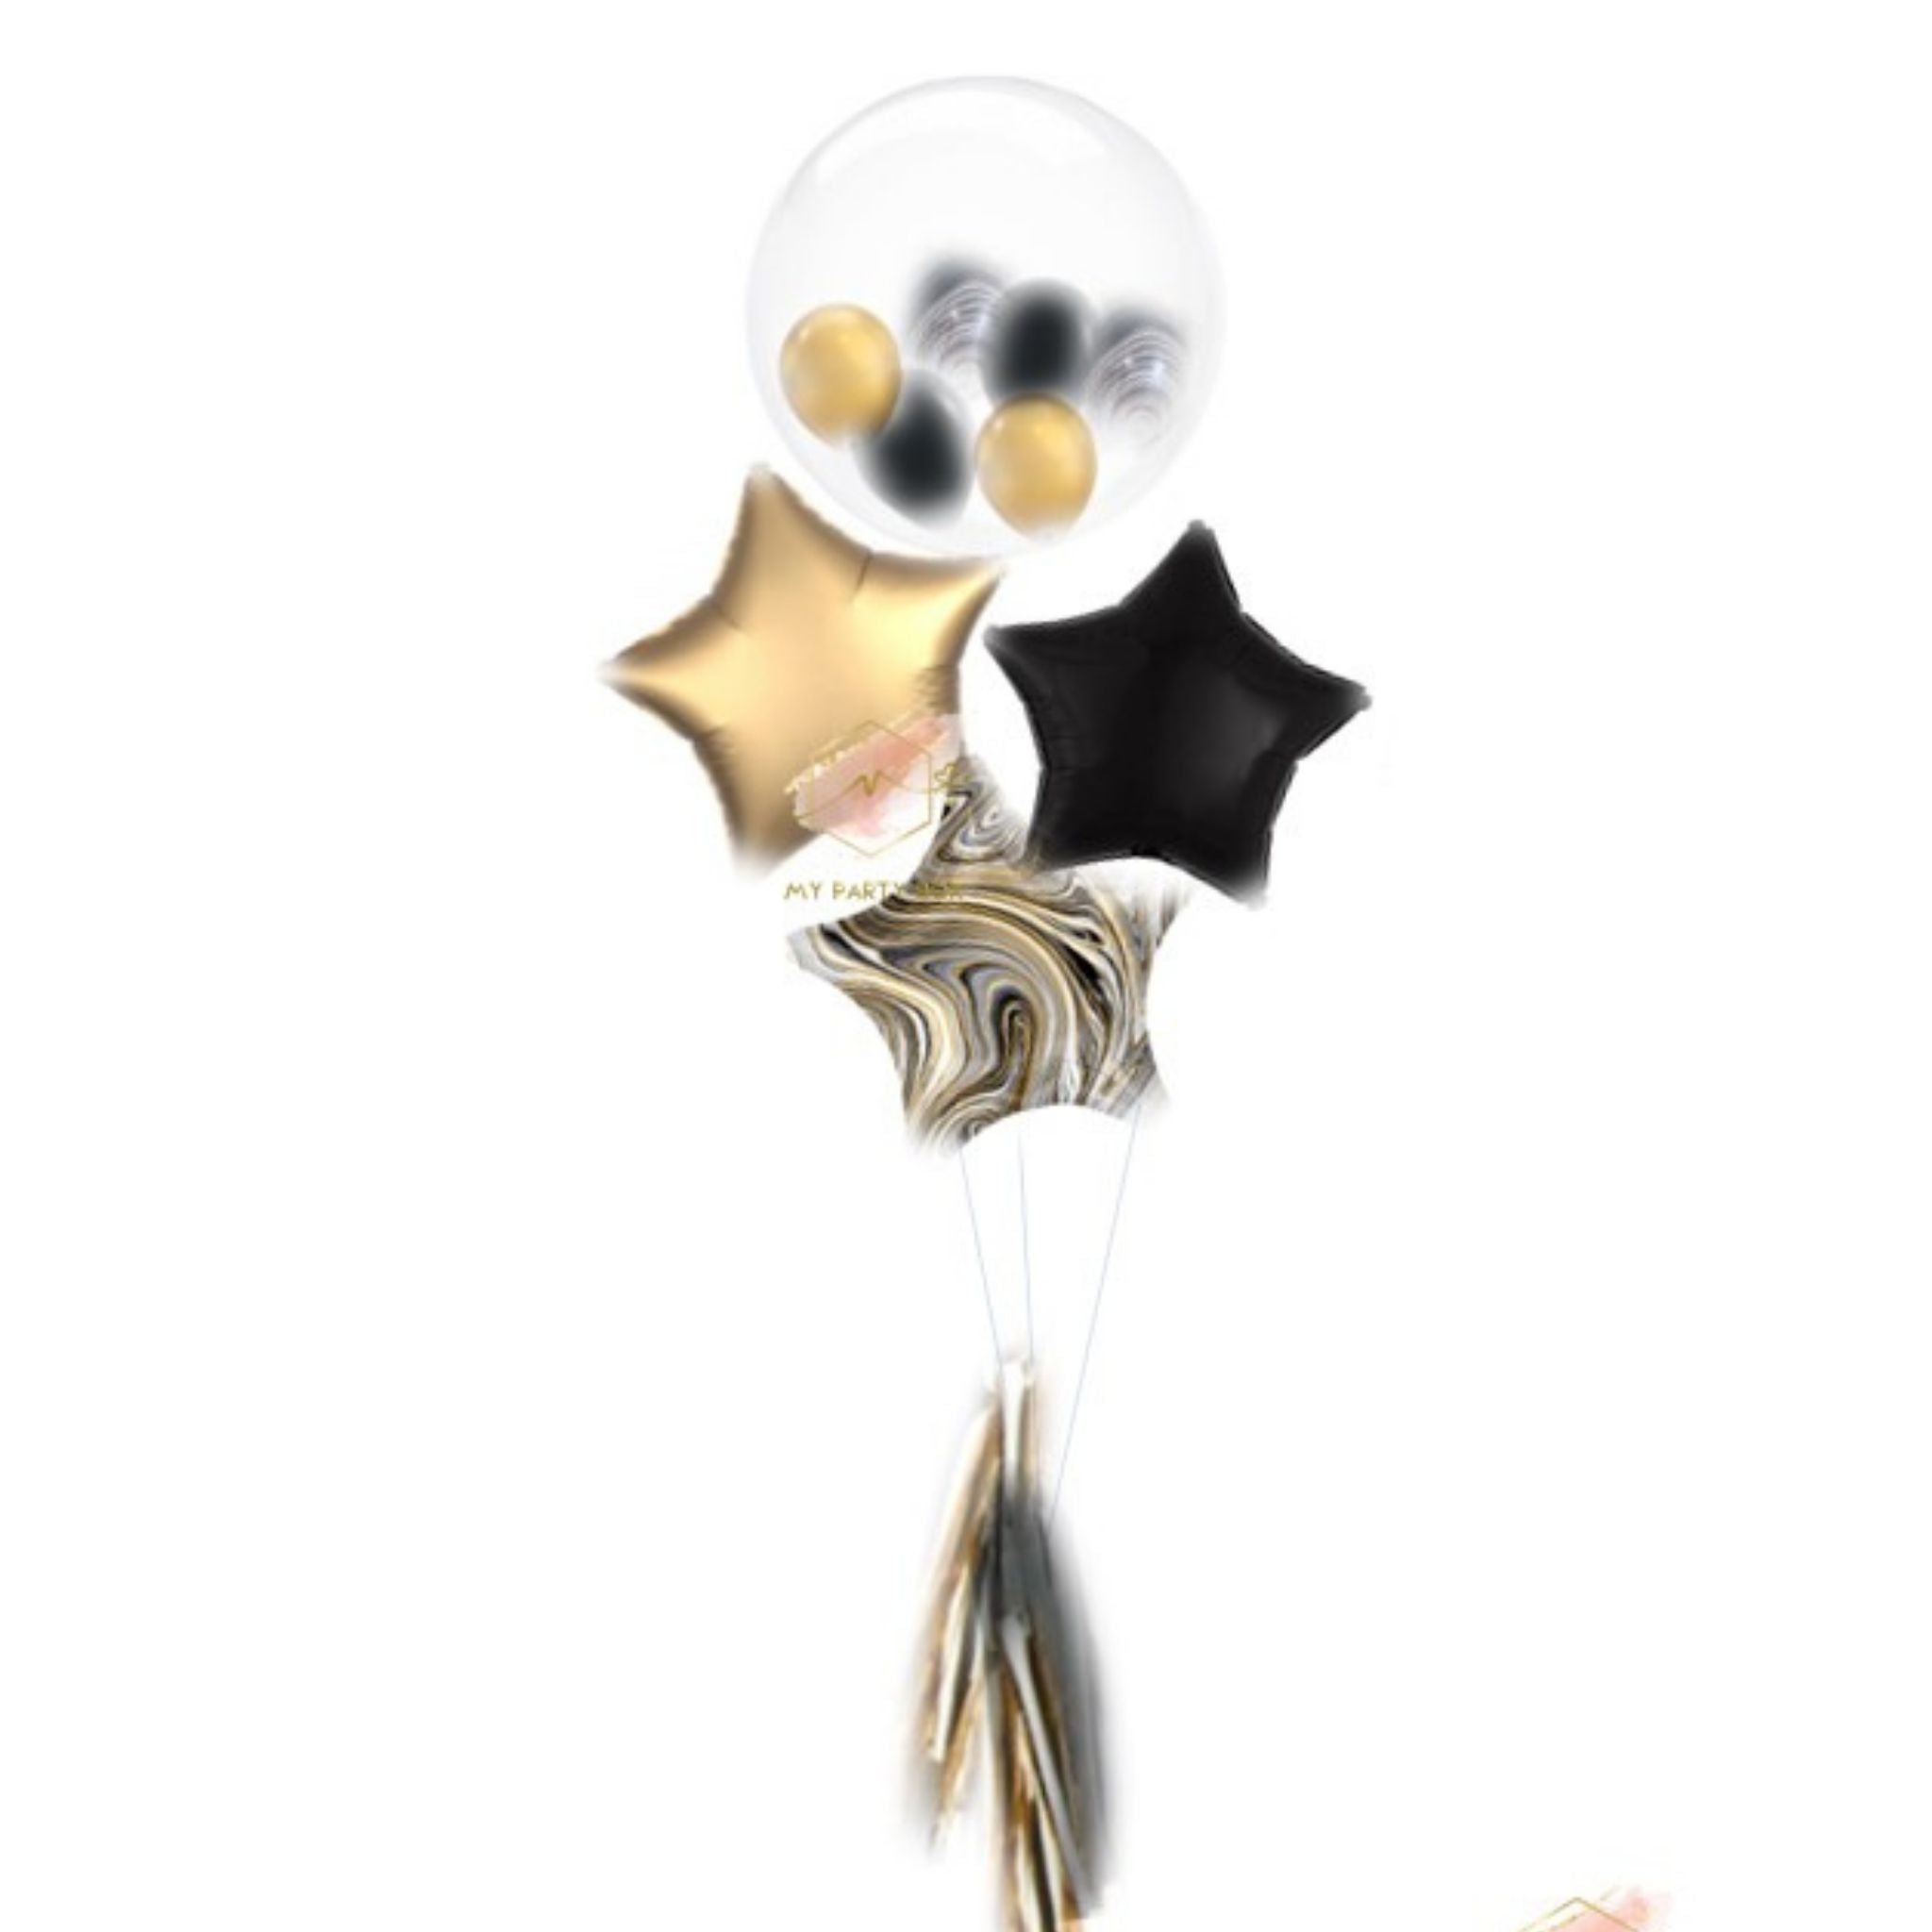 My Party Box Bubble Gum Balloon Bouquet with one bubble balloon with mini latex balloon inside and one gold foil star balloon, one black foil star balloon and one black marble foil star balloon